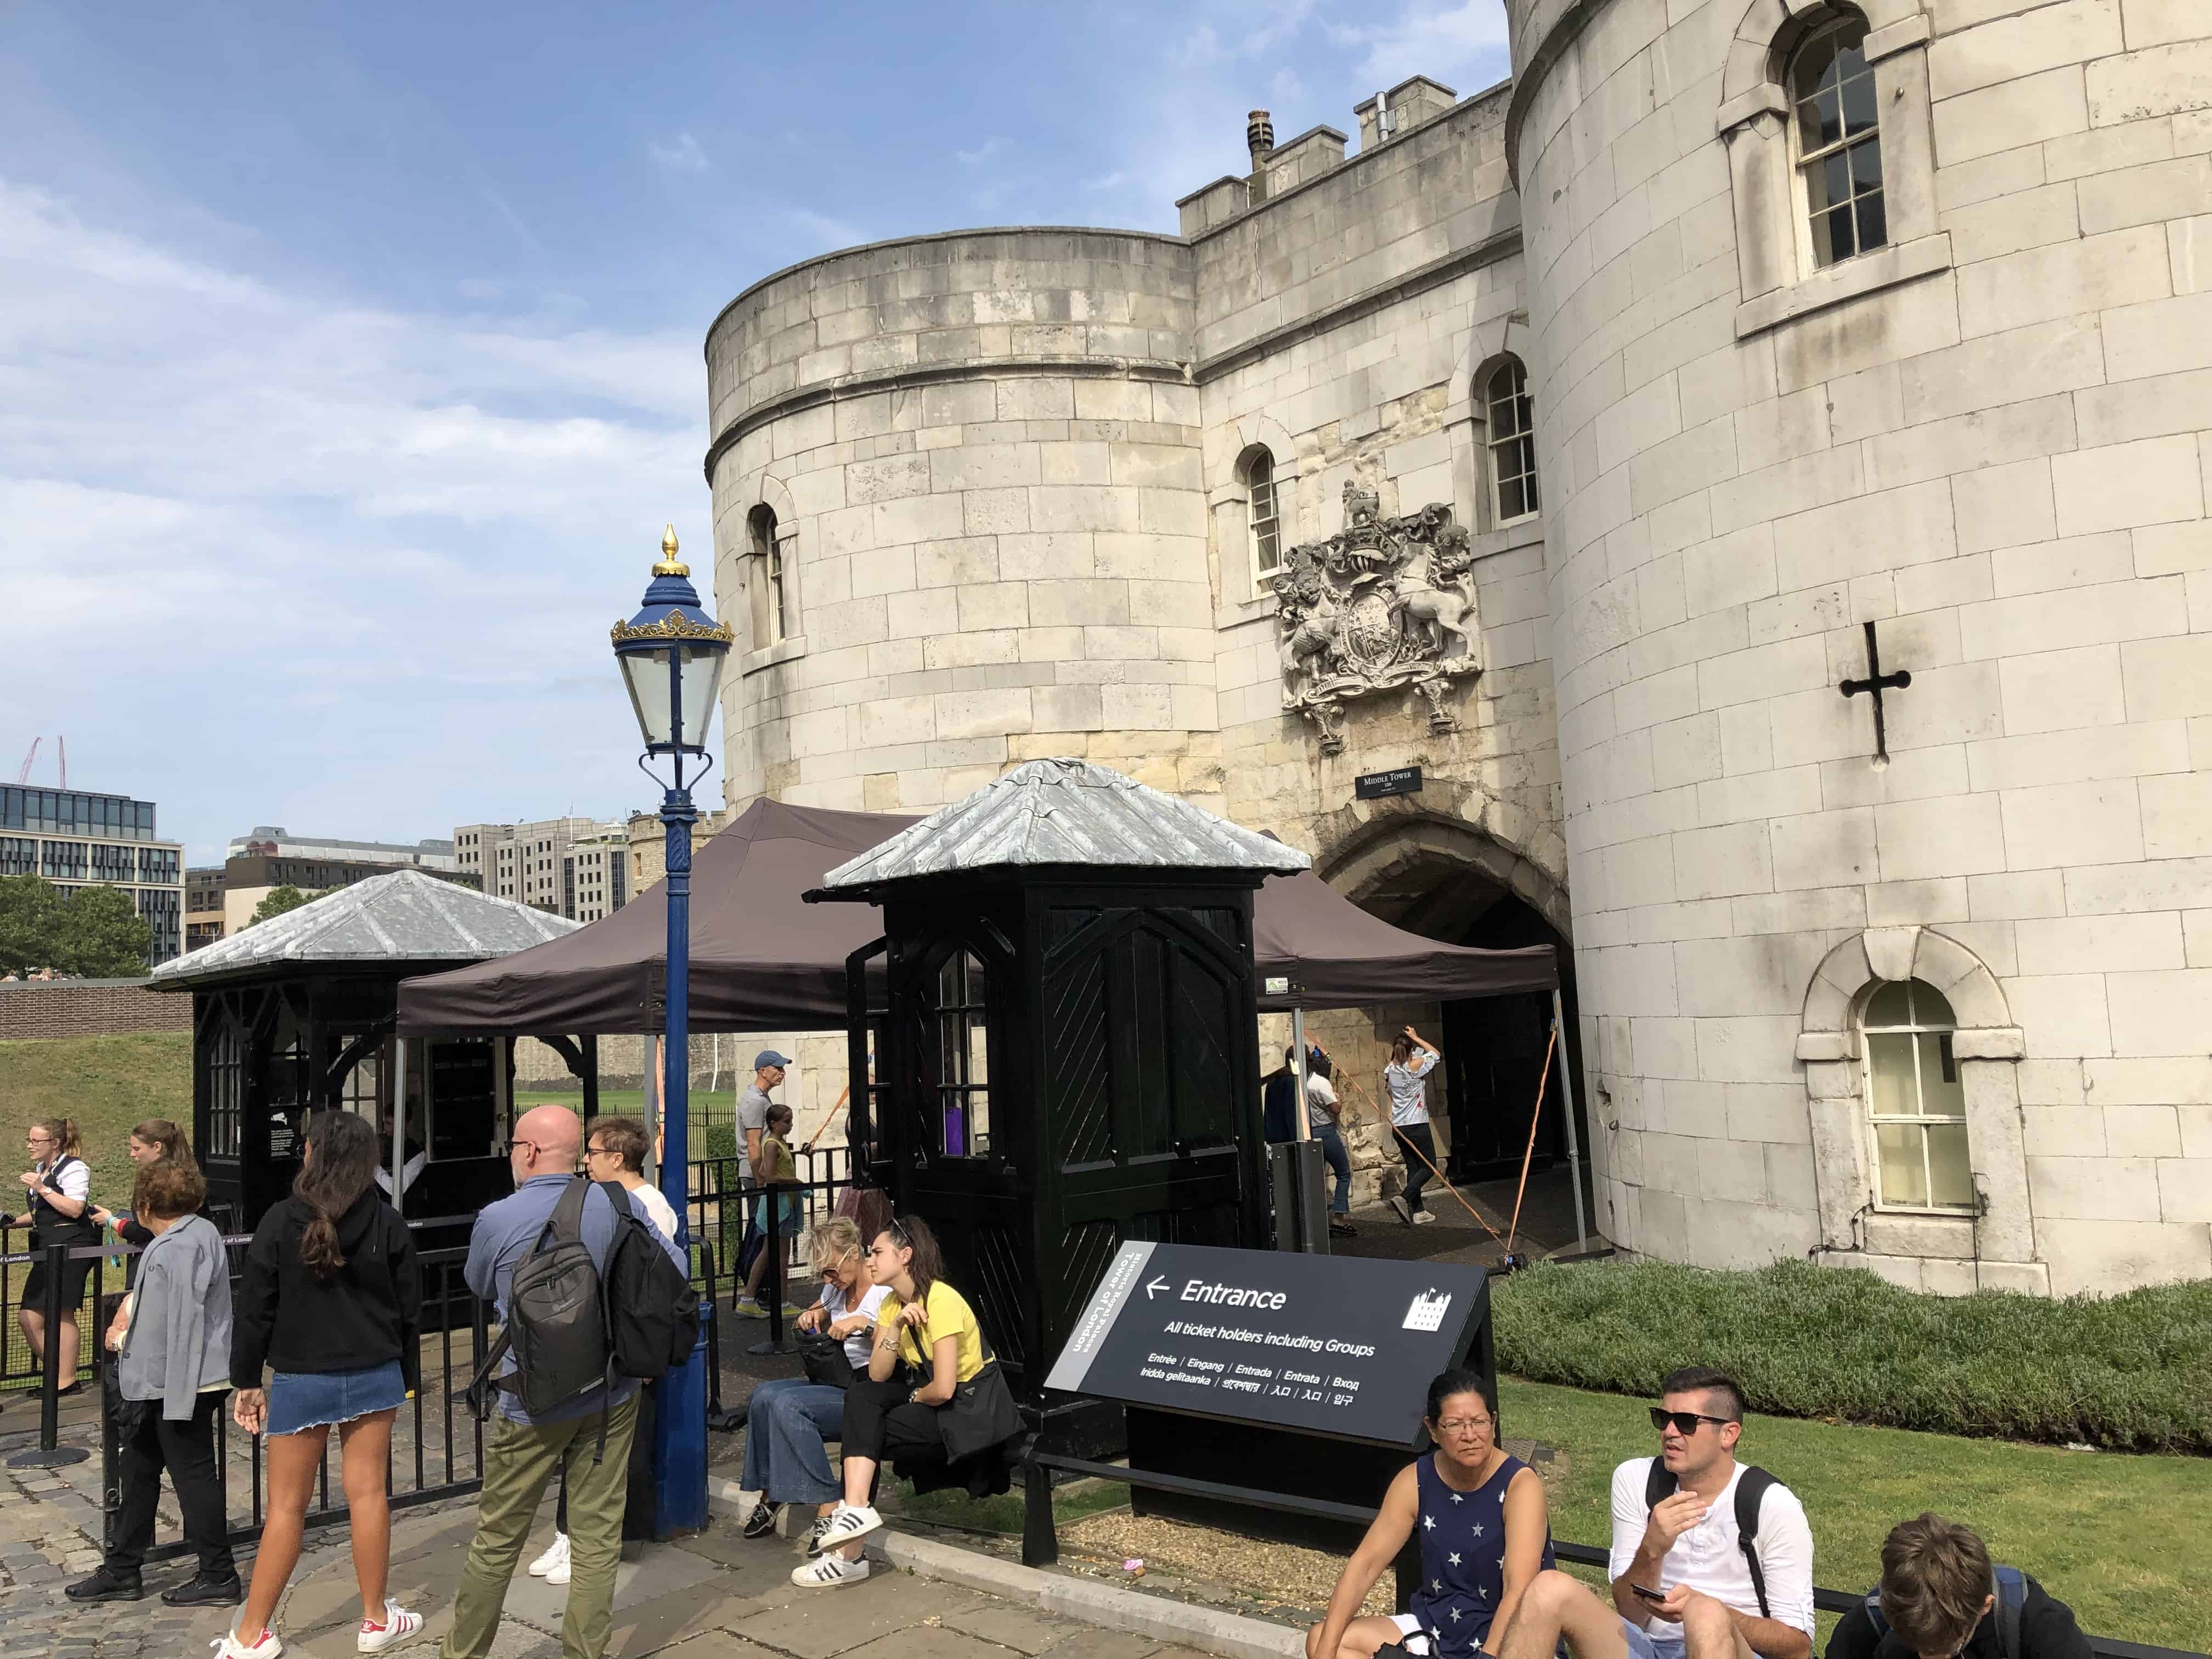 Entrance at the Tower of London, England